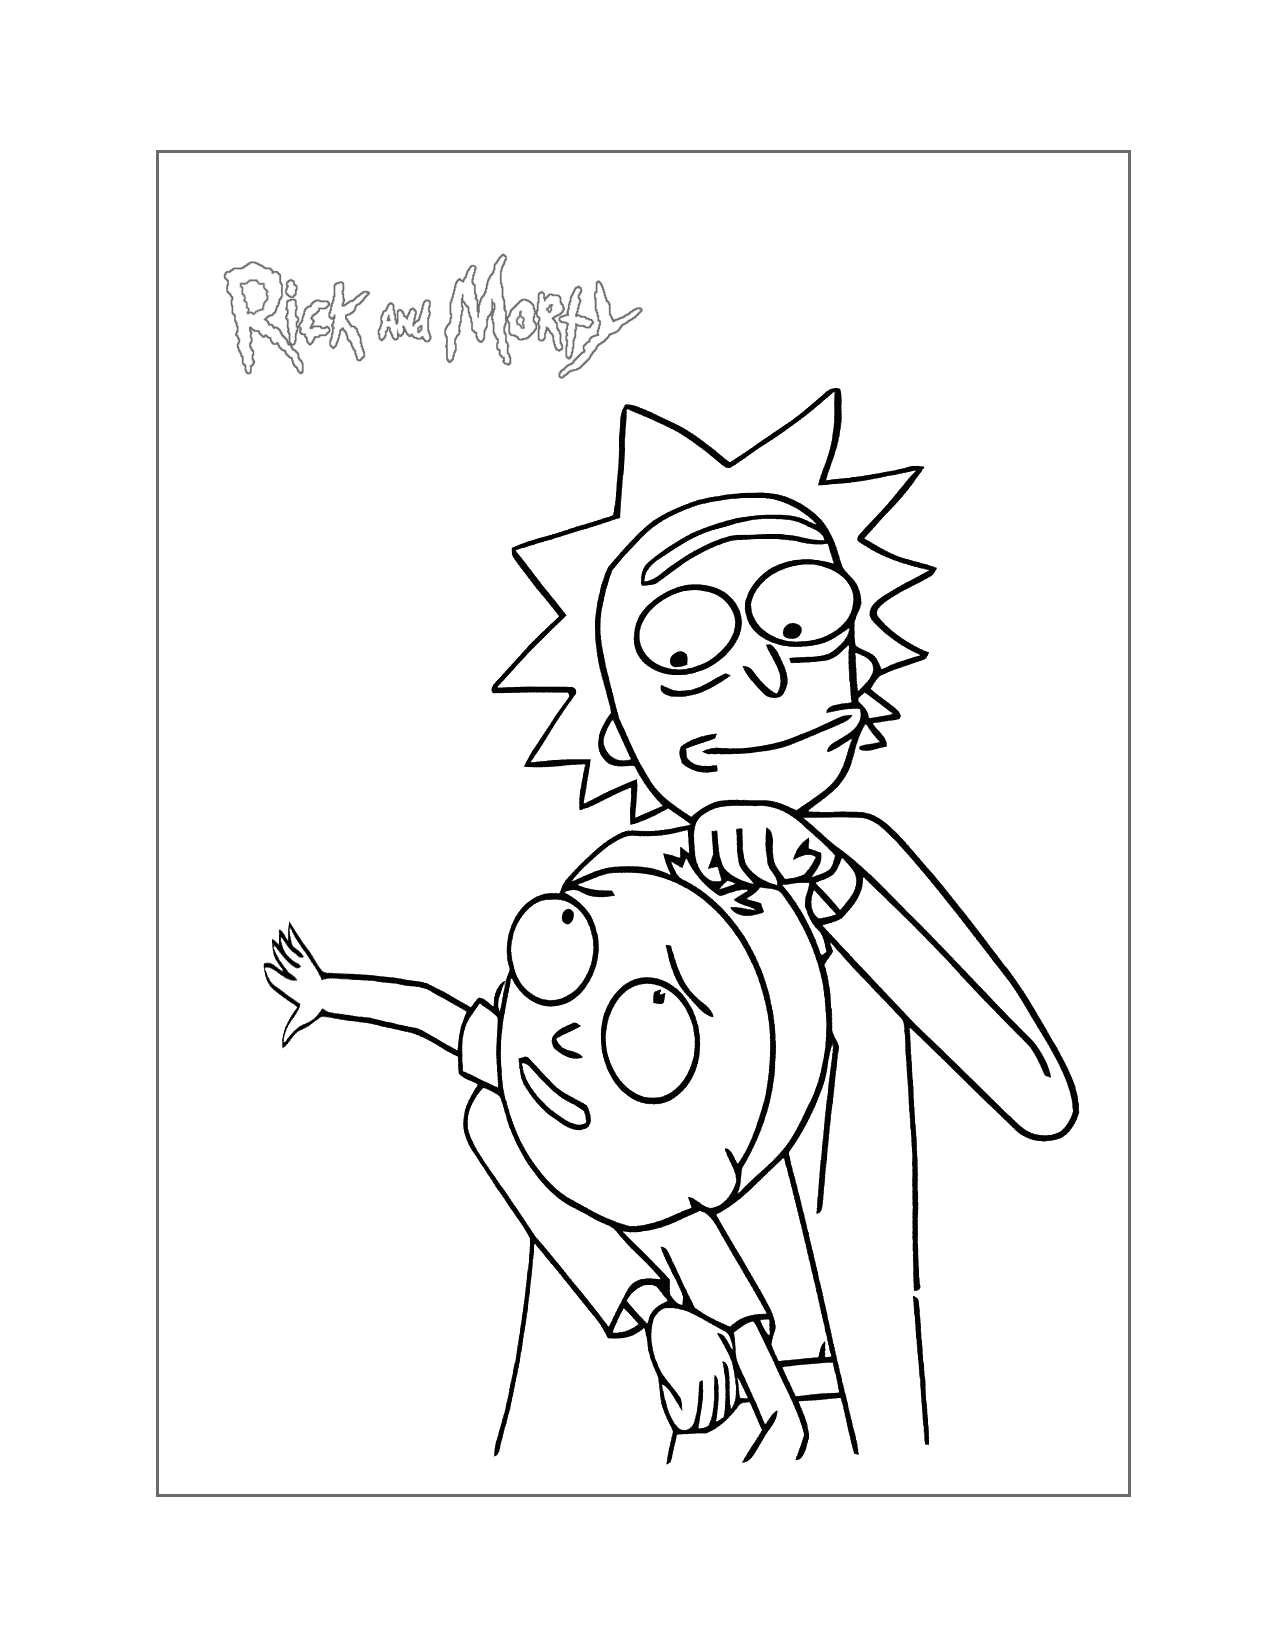 Rick Giving Morty A Noogy Coloring Page